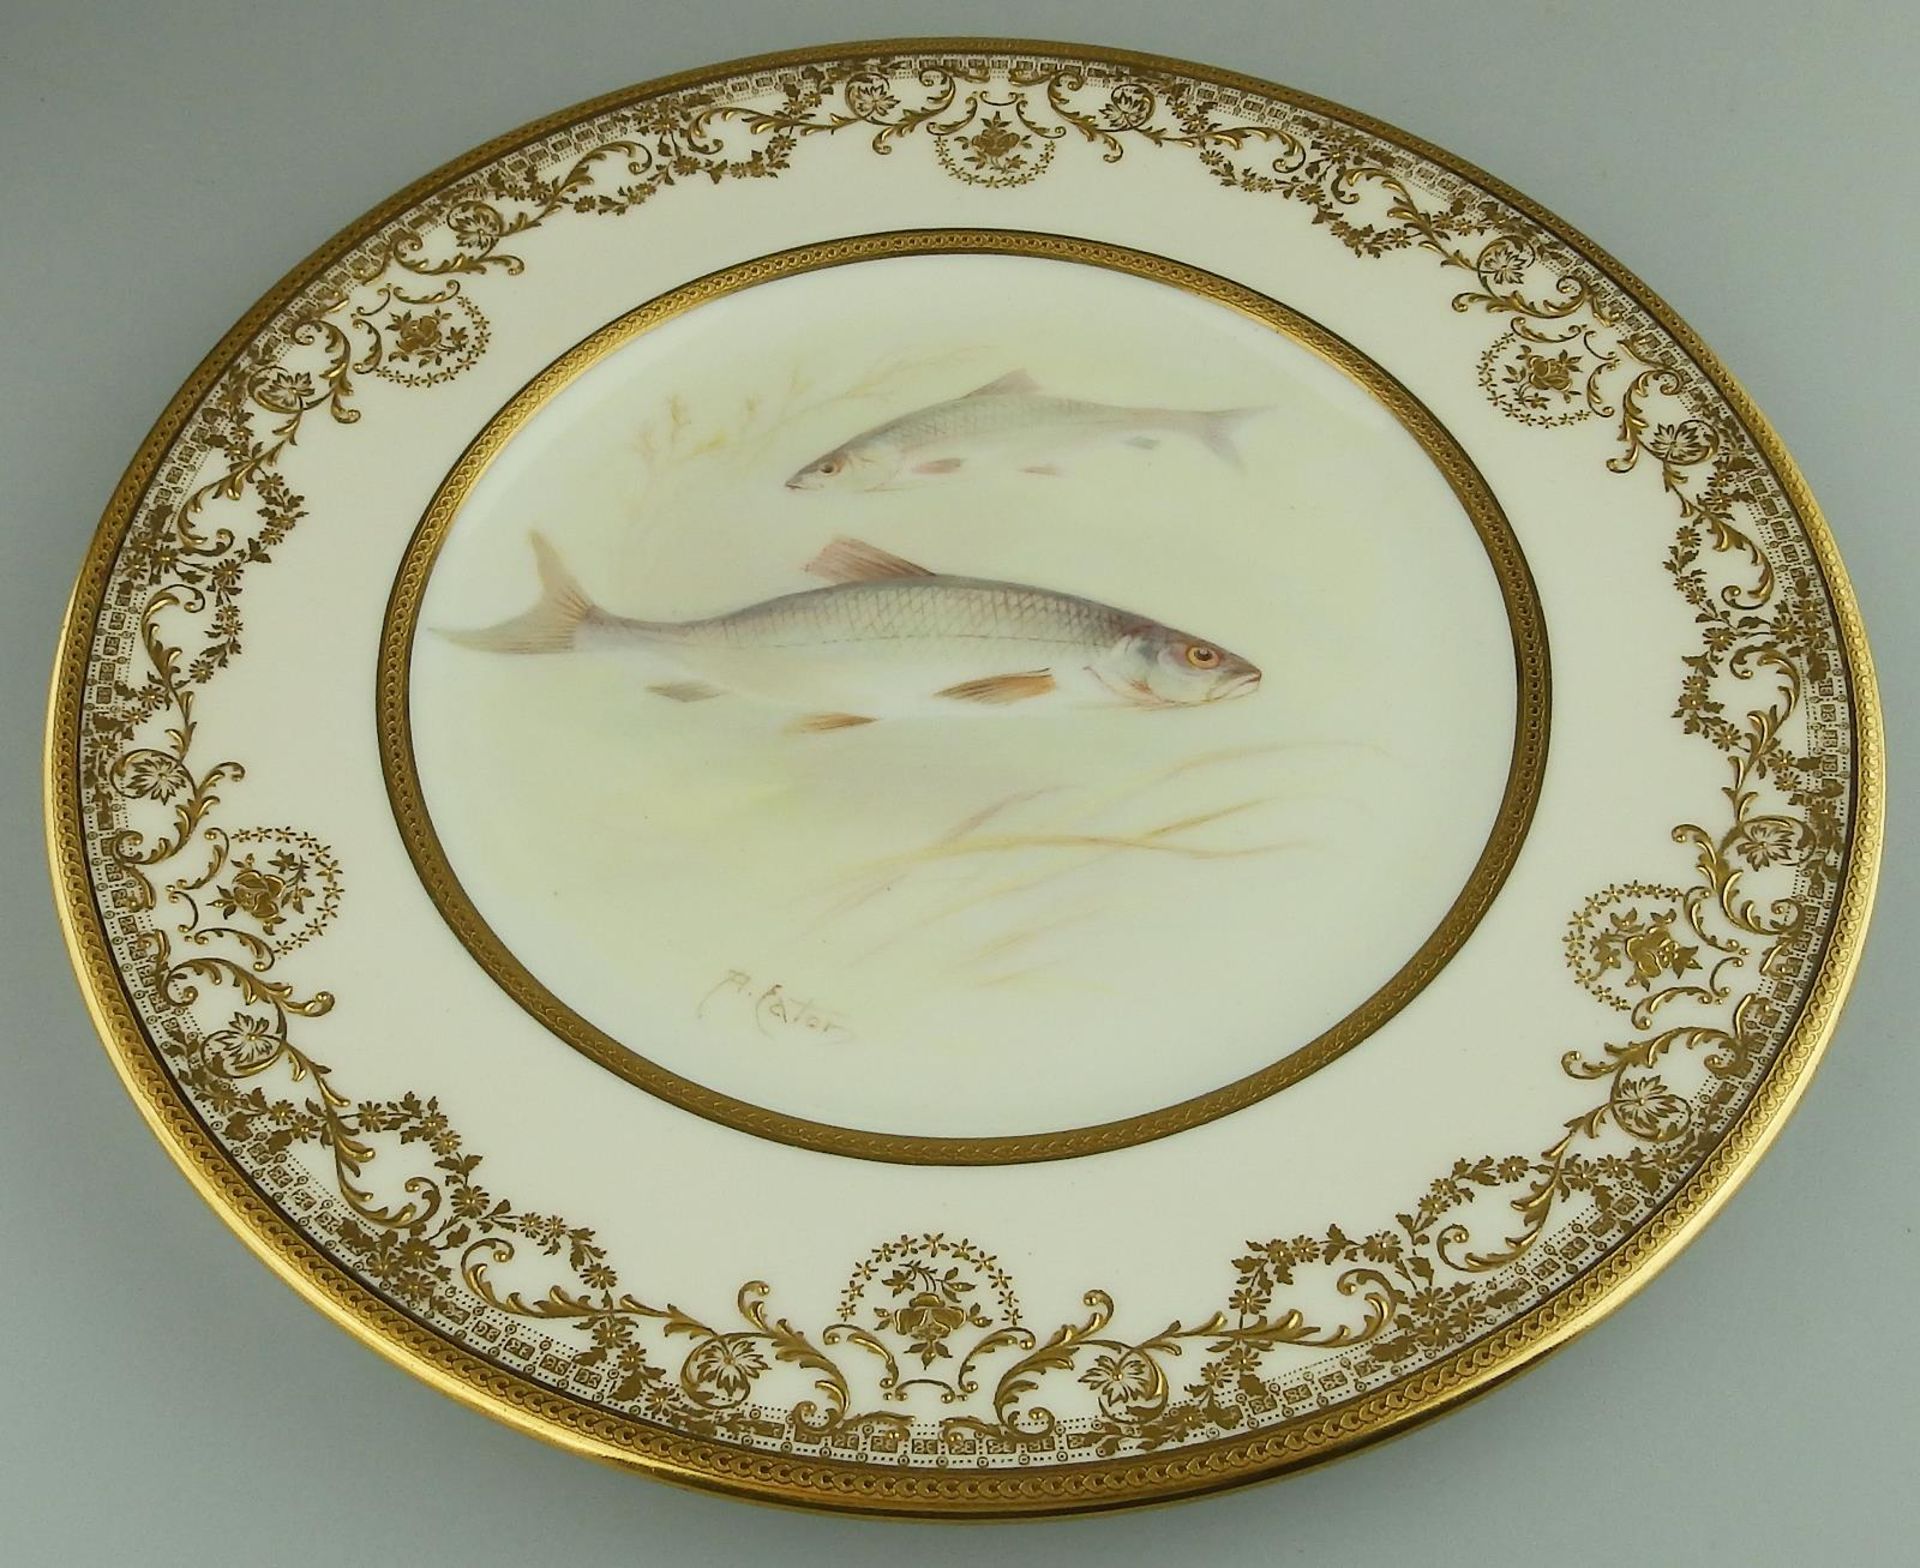 A wonderful Royal Doulton hand painted with Fish Cabinet Plate by A Eaton C.1900 - Image 2 of 4